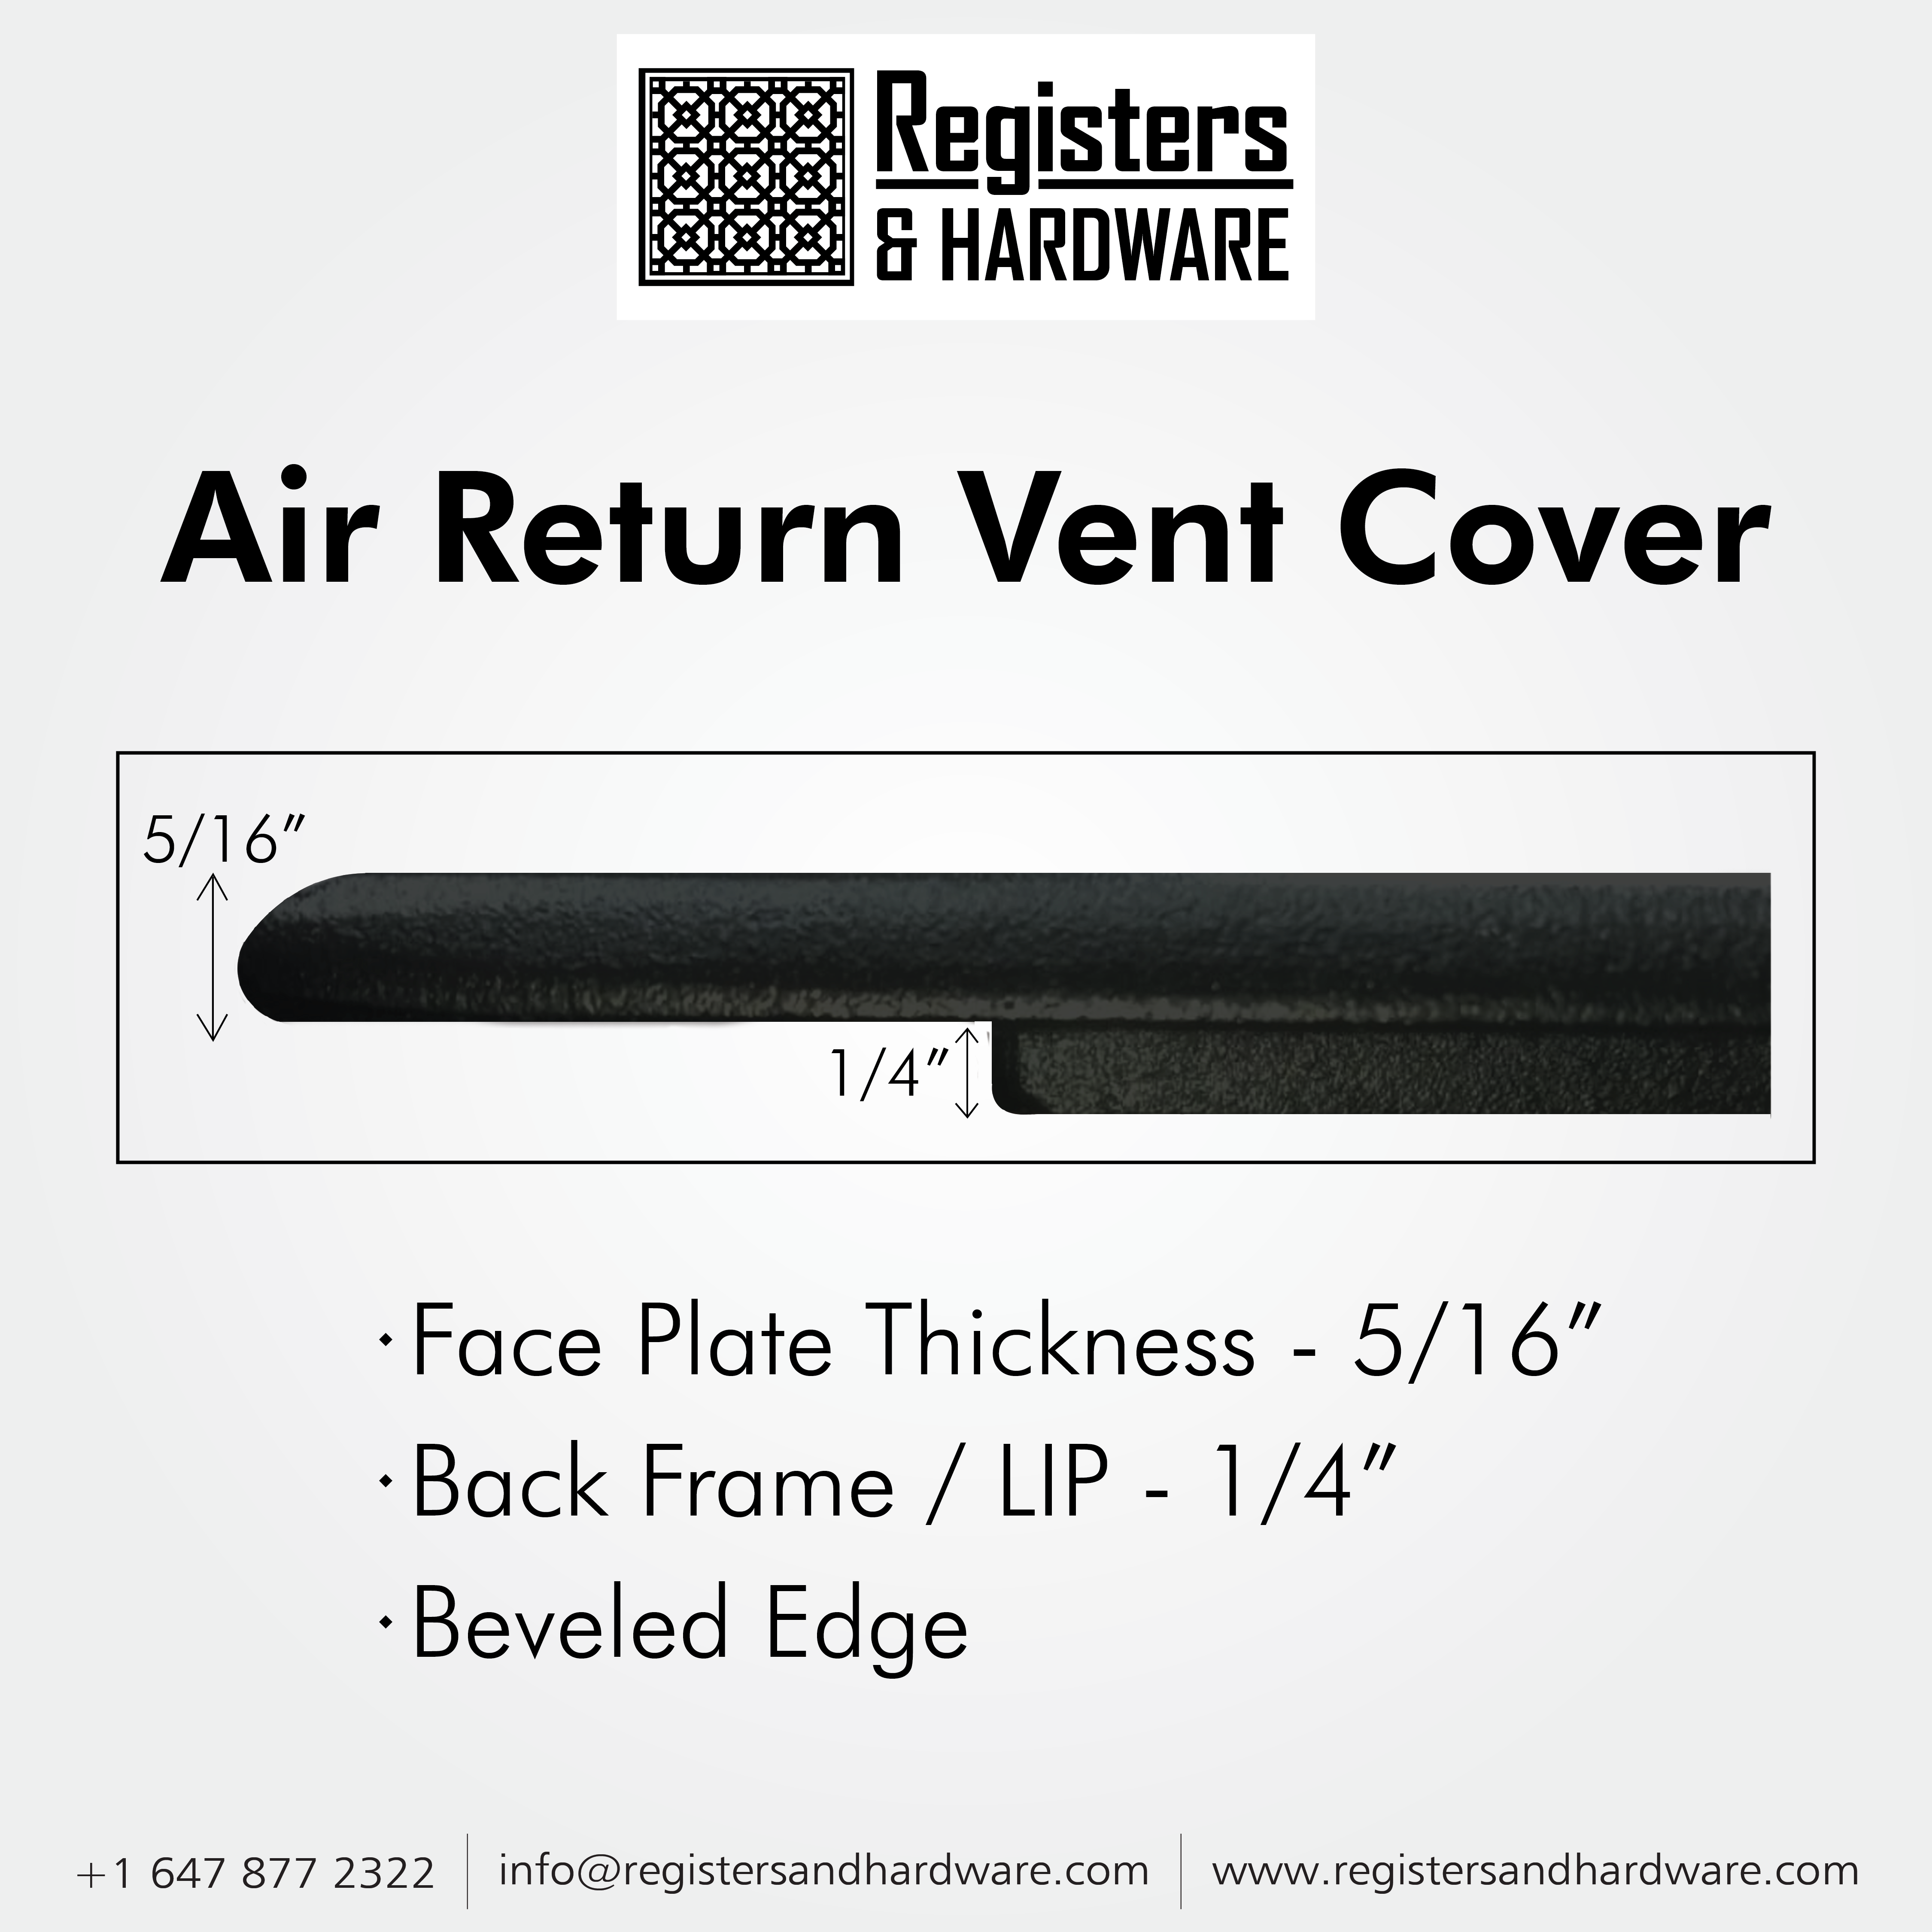 Achtek AIR RETURN 8"x20" Duct Opening (Overall Size 10"x22") | Heavy Cast Aluminum Air Grille HVAC Duct || Powder Coated